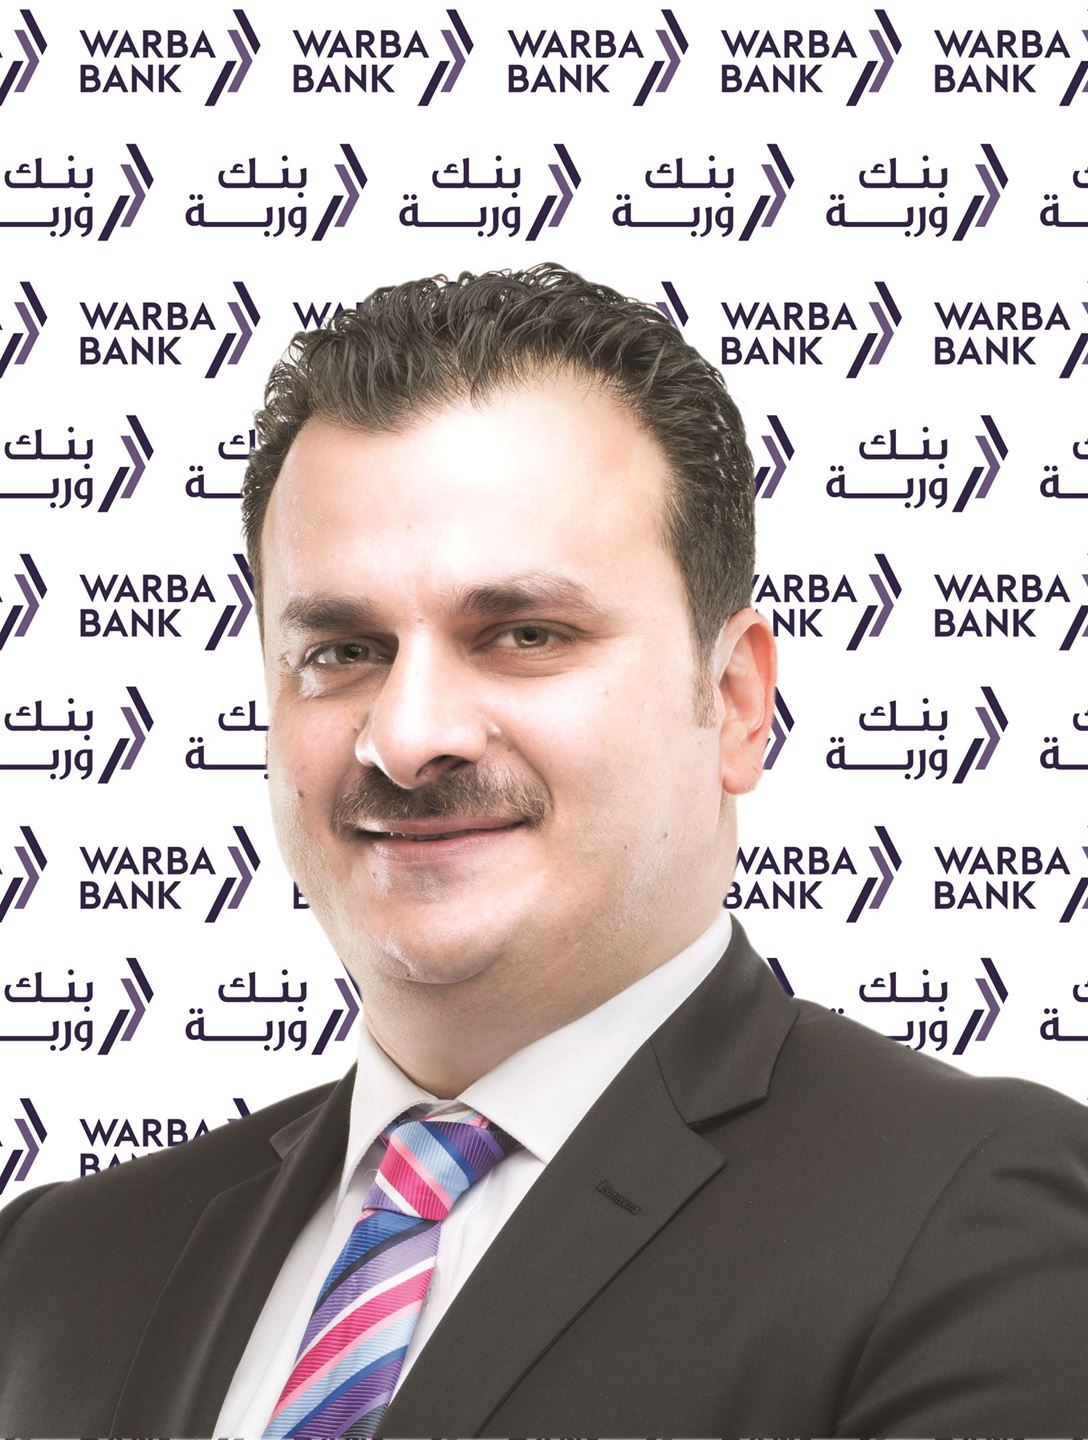 Mohamed Atef Al-Shareef, Chief Strategy and Digital Officer at Warba Bank